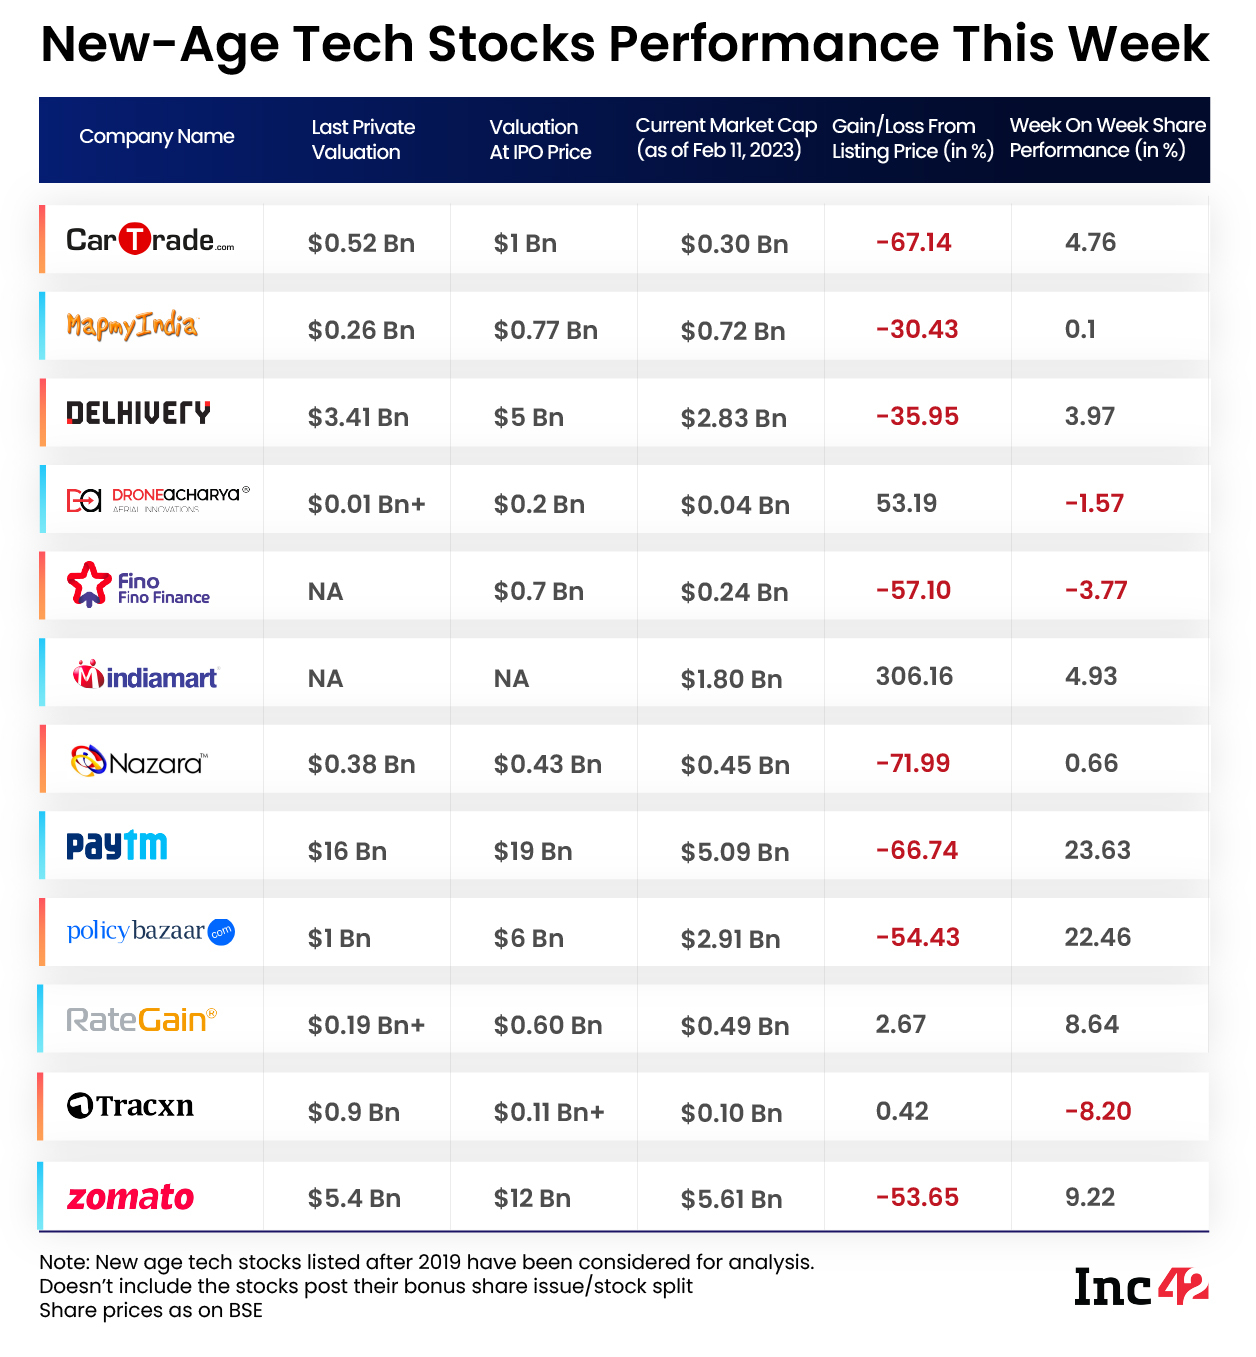 new-age tech stock performance